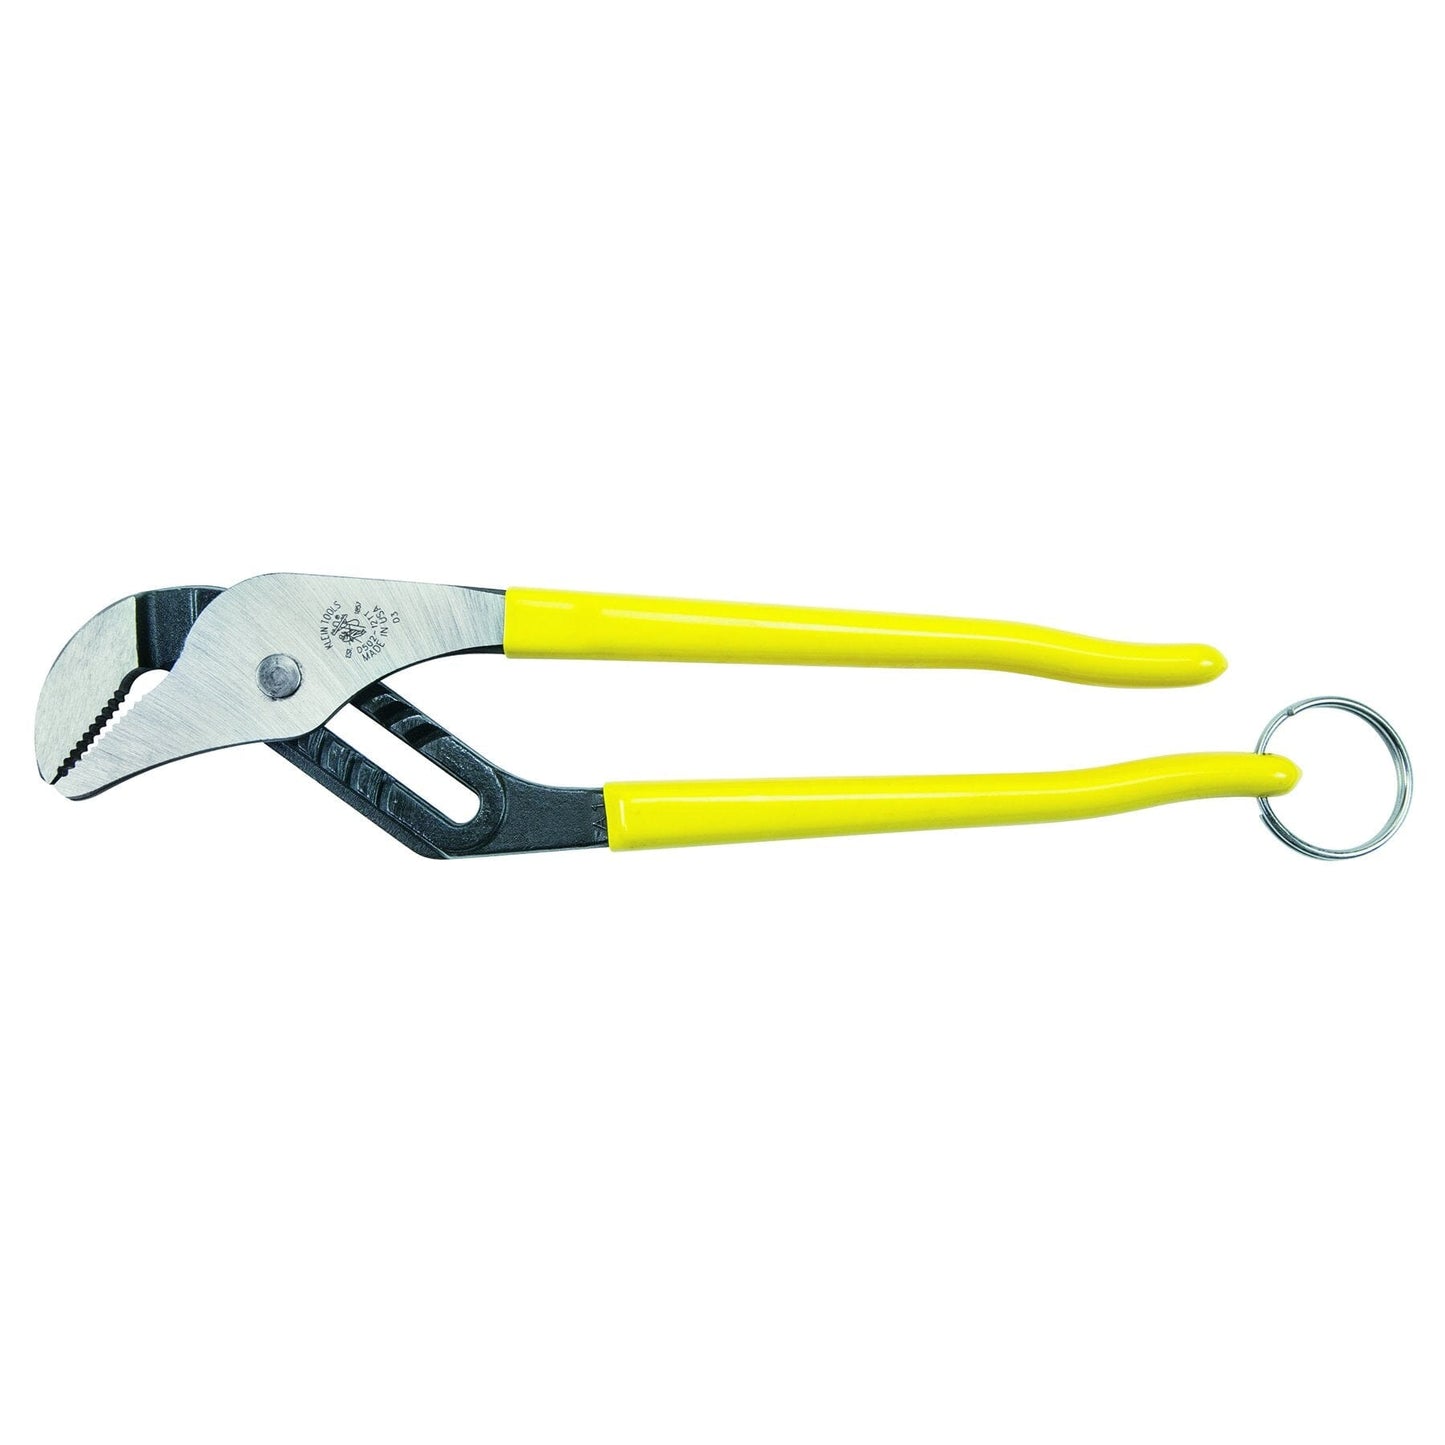 Klein Pump Pliers 12" with Tether Ring - D502-12TT DISCONTINUED Pliers Klein Tools 